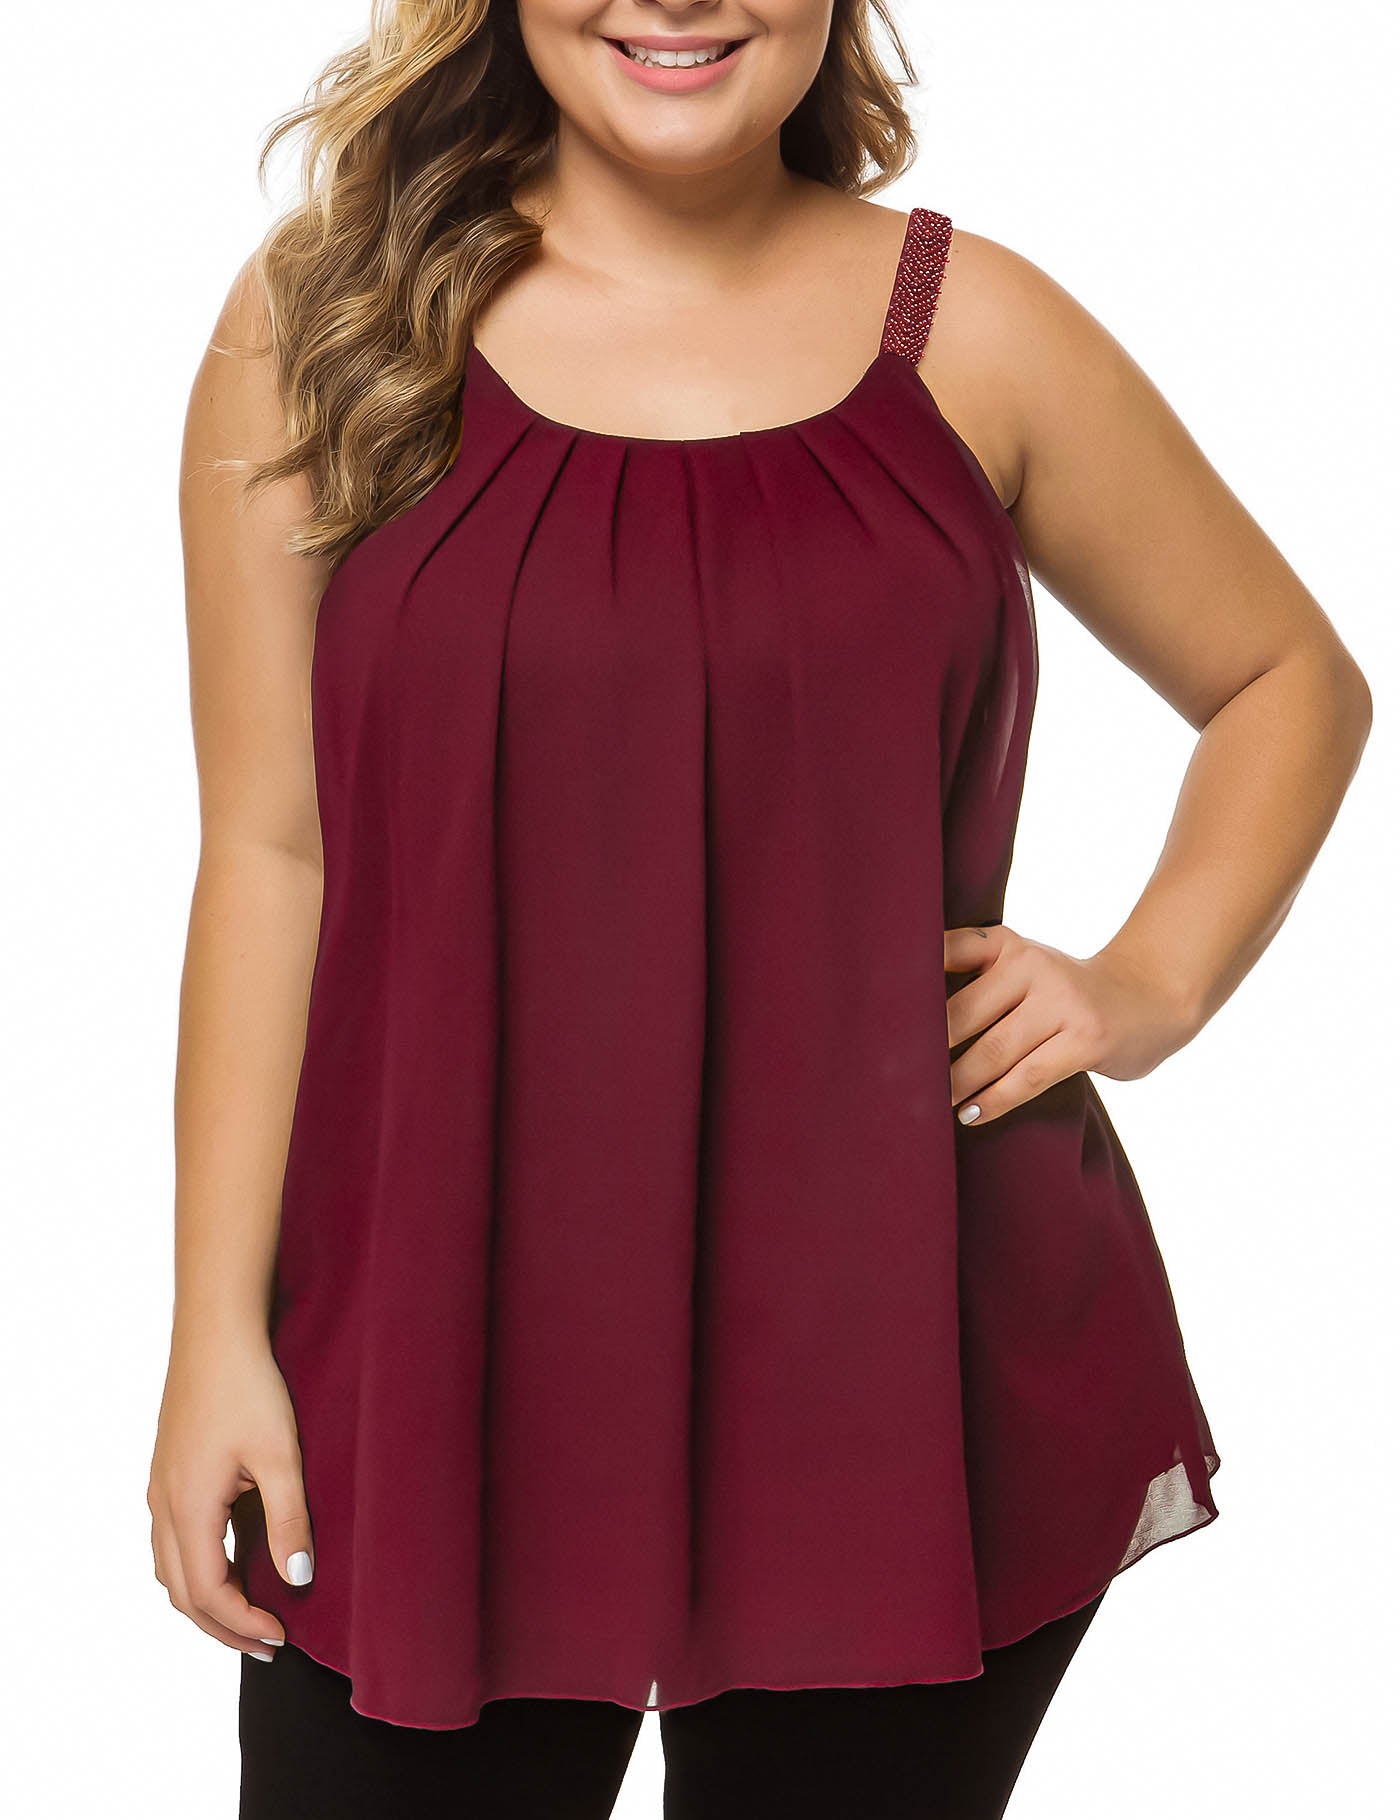 Cyanstyle Women Sleeveless Racerback Tank Top Summer Pleated Casual Shirts  Loose Fitting Plus Size Tees Burgundy Small - ShopStyle